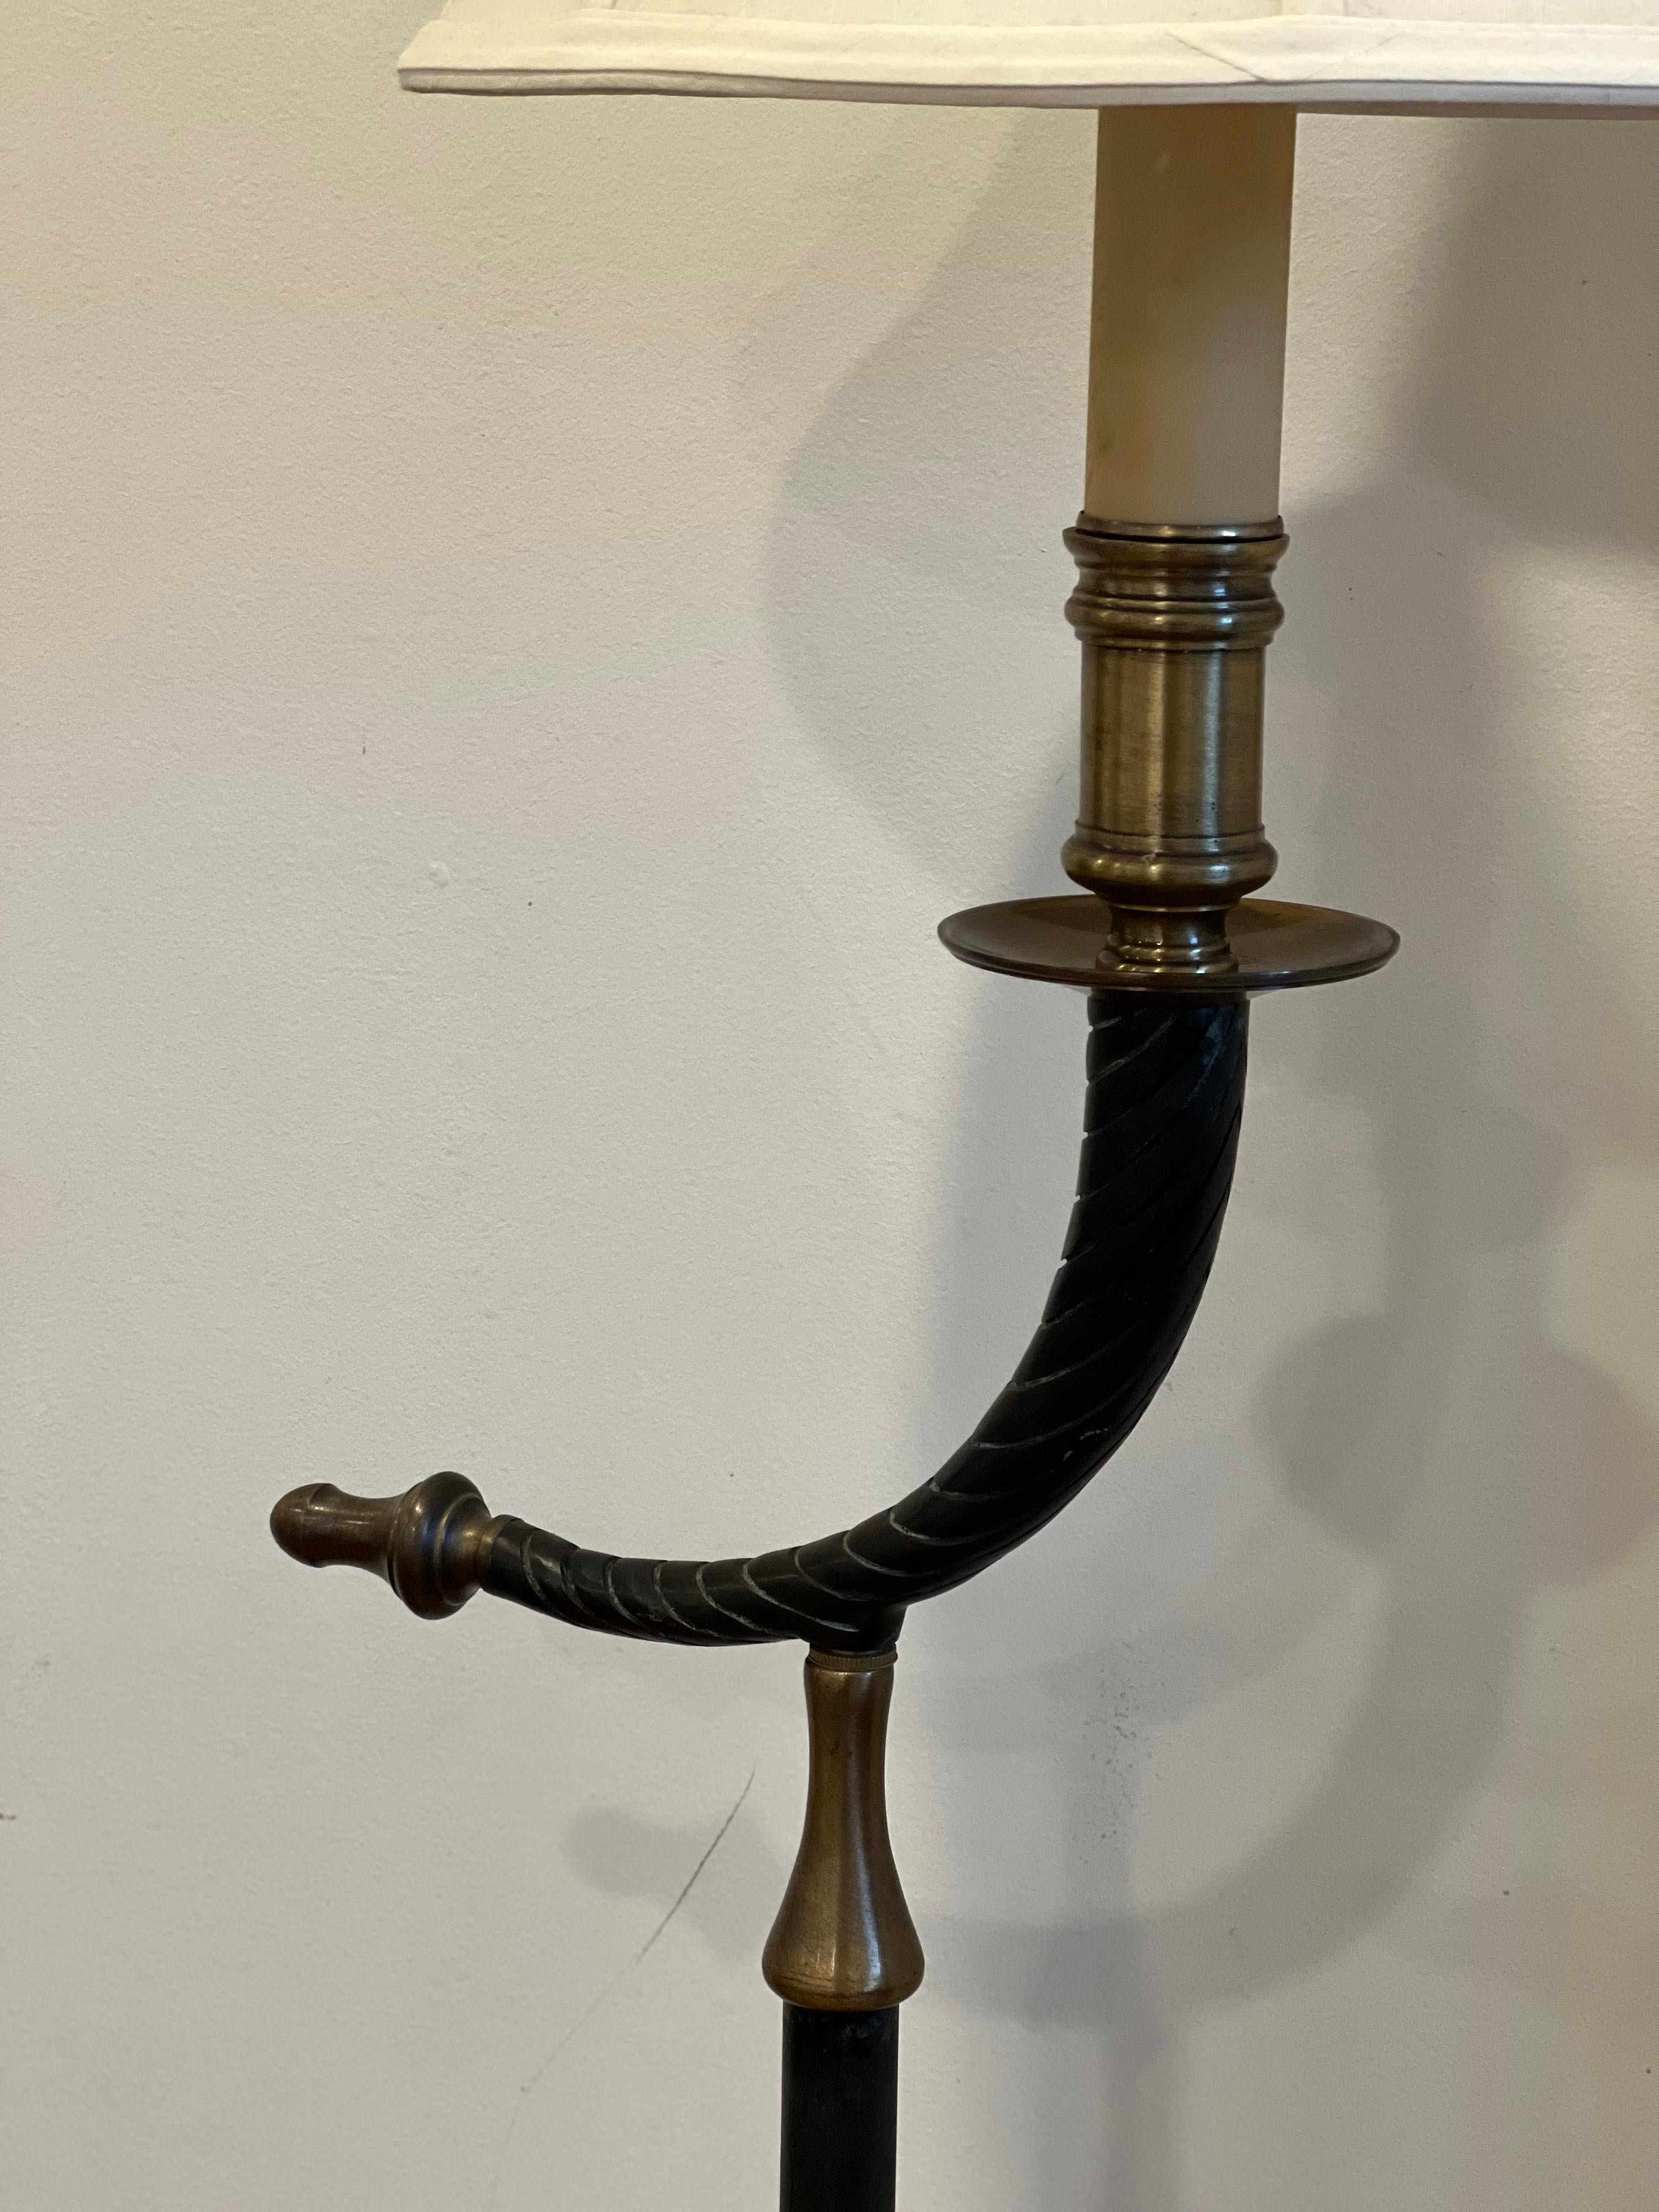 Unique Floor Lamp in Chapman Style.
Bronze and Brass finish. Has a faux twisted horn style along the body. 

Measures: 52.5 Height without harp. 62.5 with current harp.